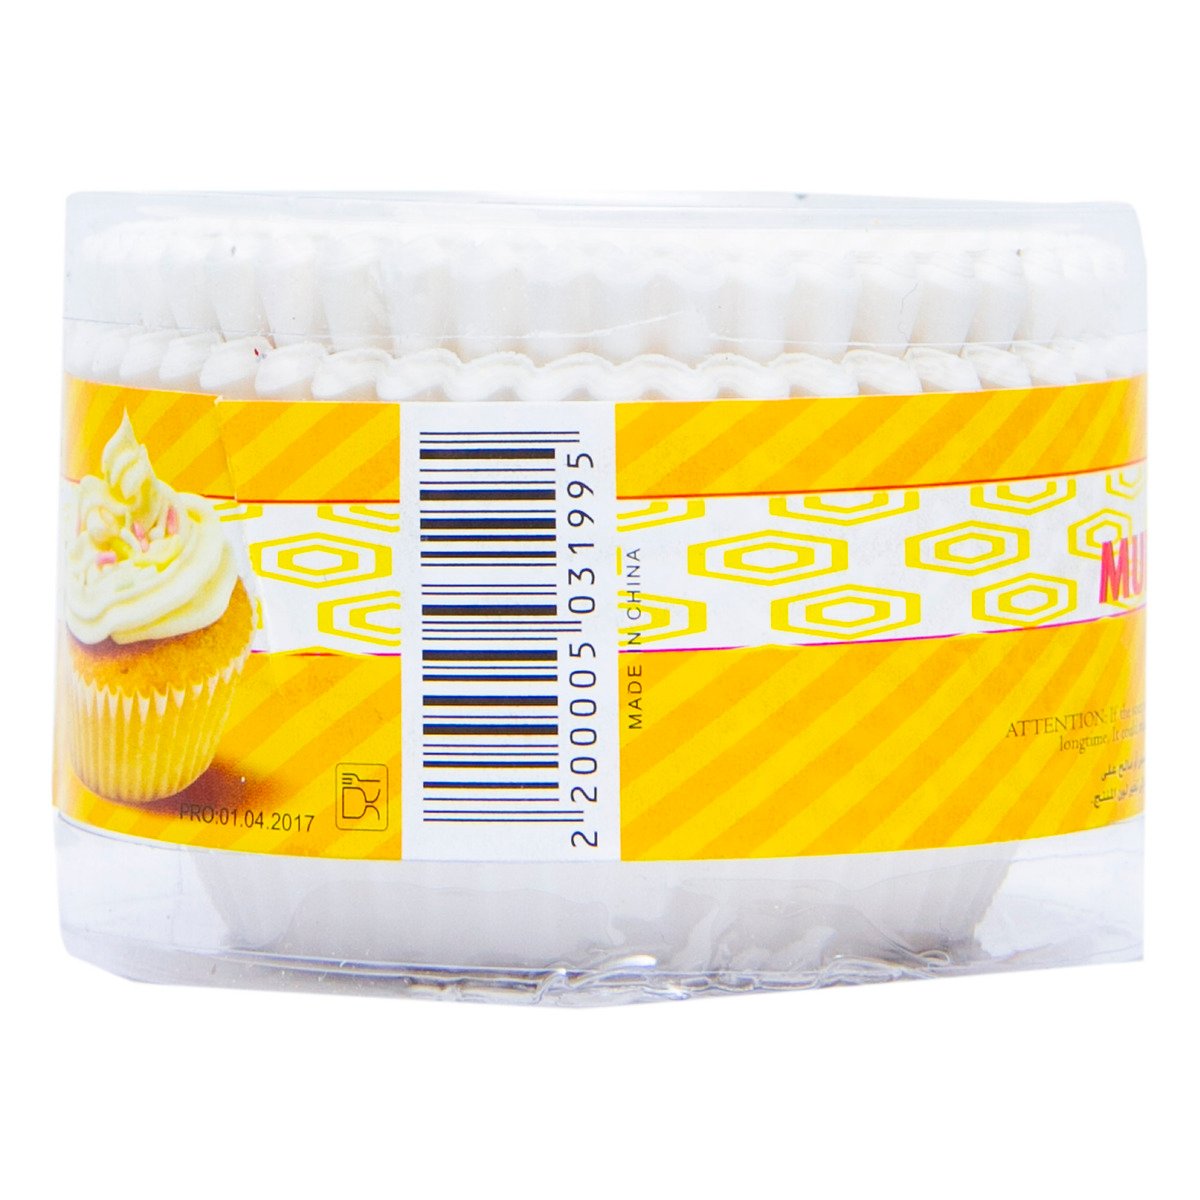 Home Mate Muffin Cup White 100pcs